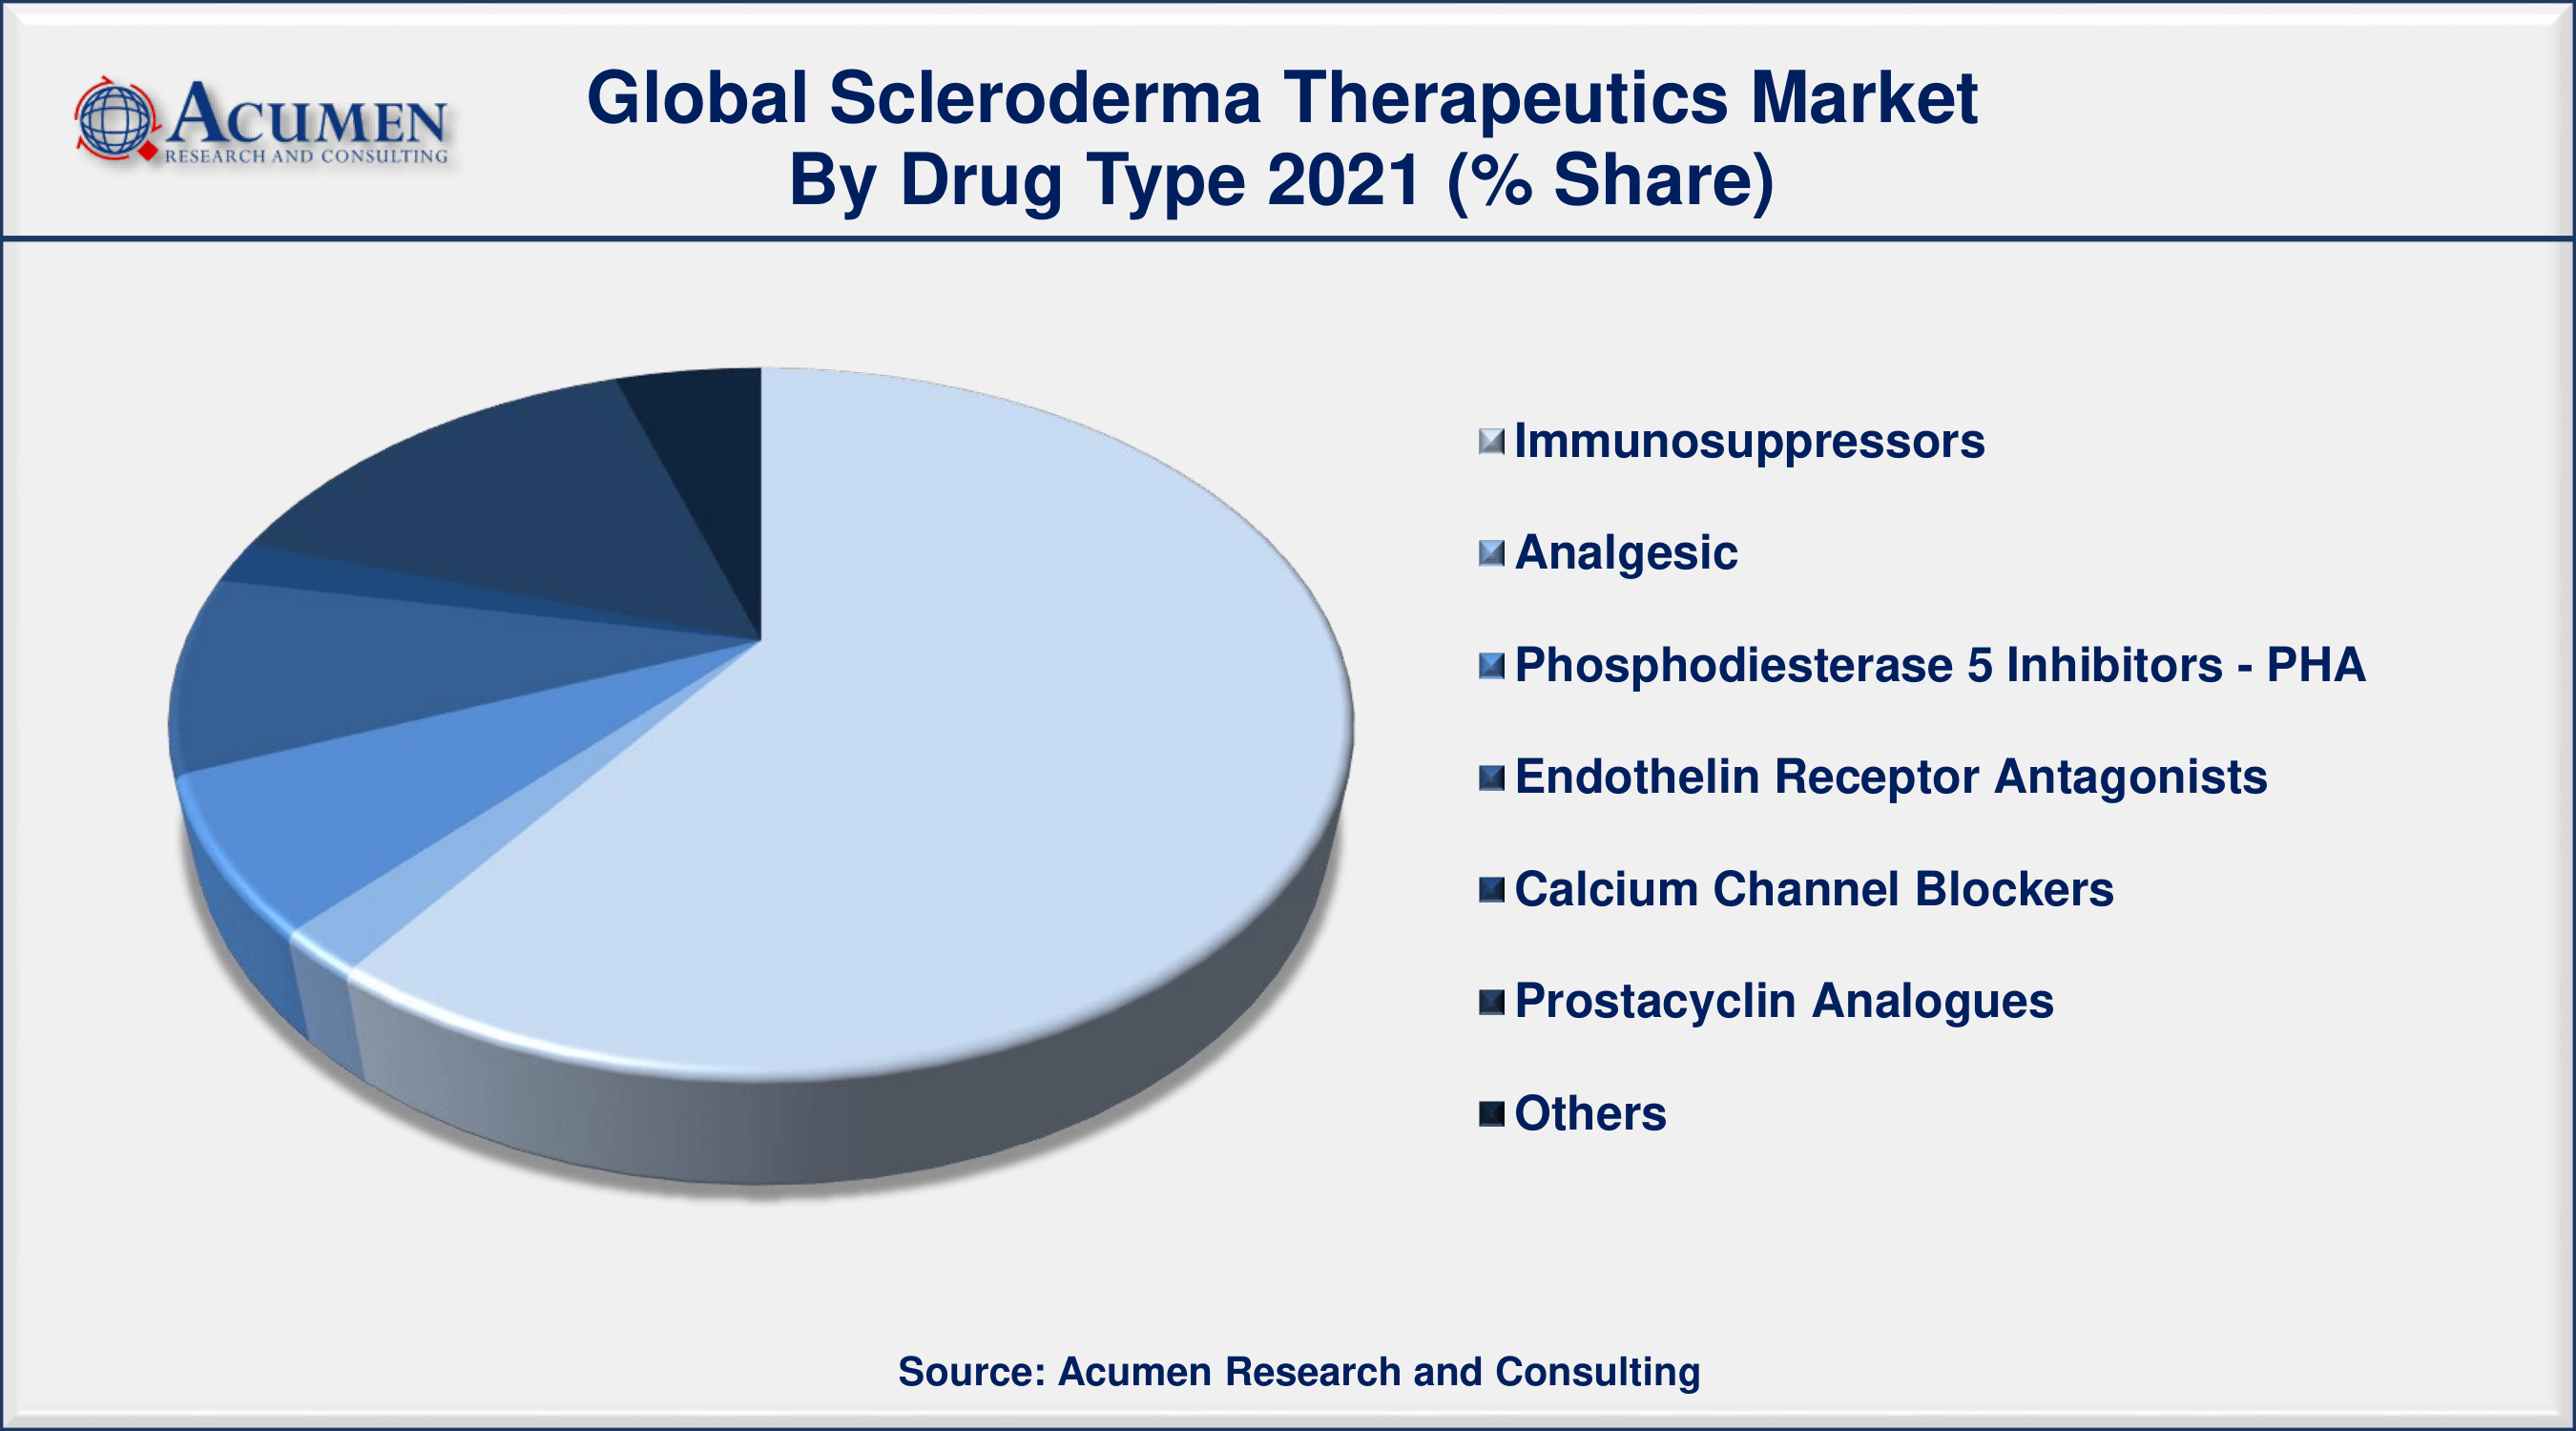 Among drug class, immunosuppressors segment will account for more than 60% of overall market share in 2021